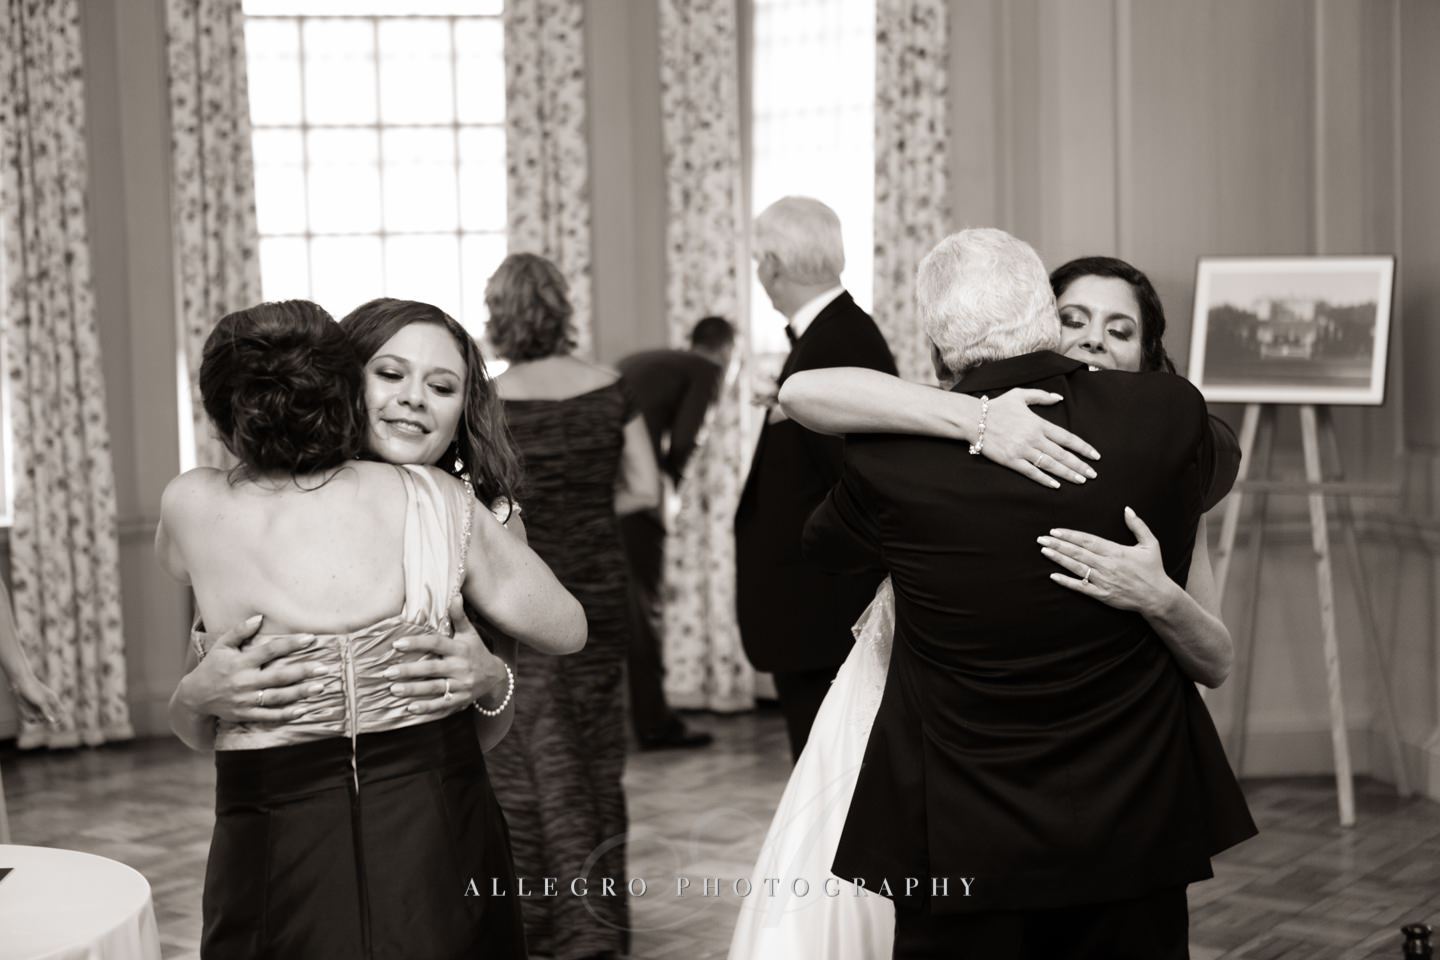 hugging parents of bride - photo by Allegro Photography